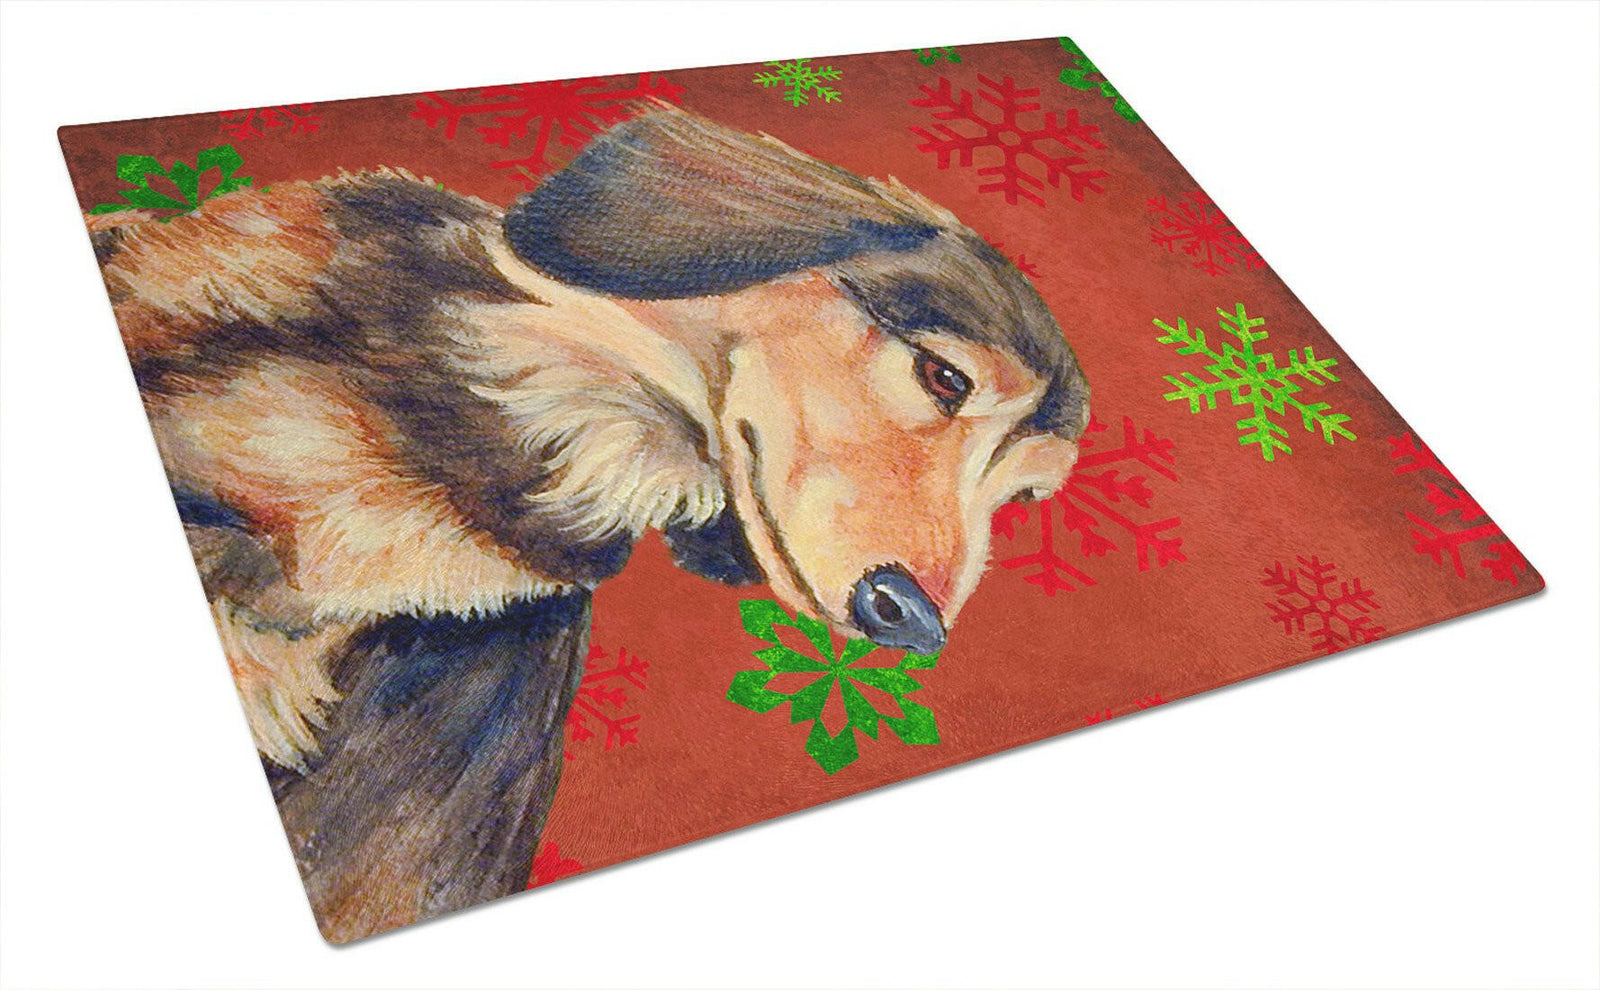 Dachshund Red and Green Snowflakes Holiday Christmas Glass Cutting Board Large by Caroline's Treasures